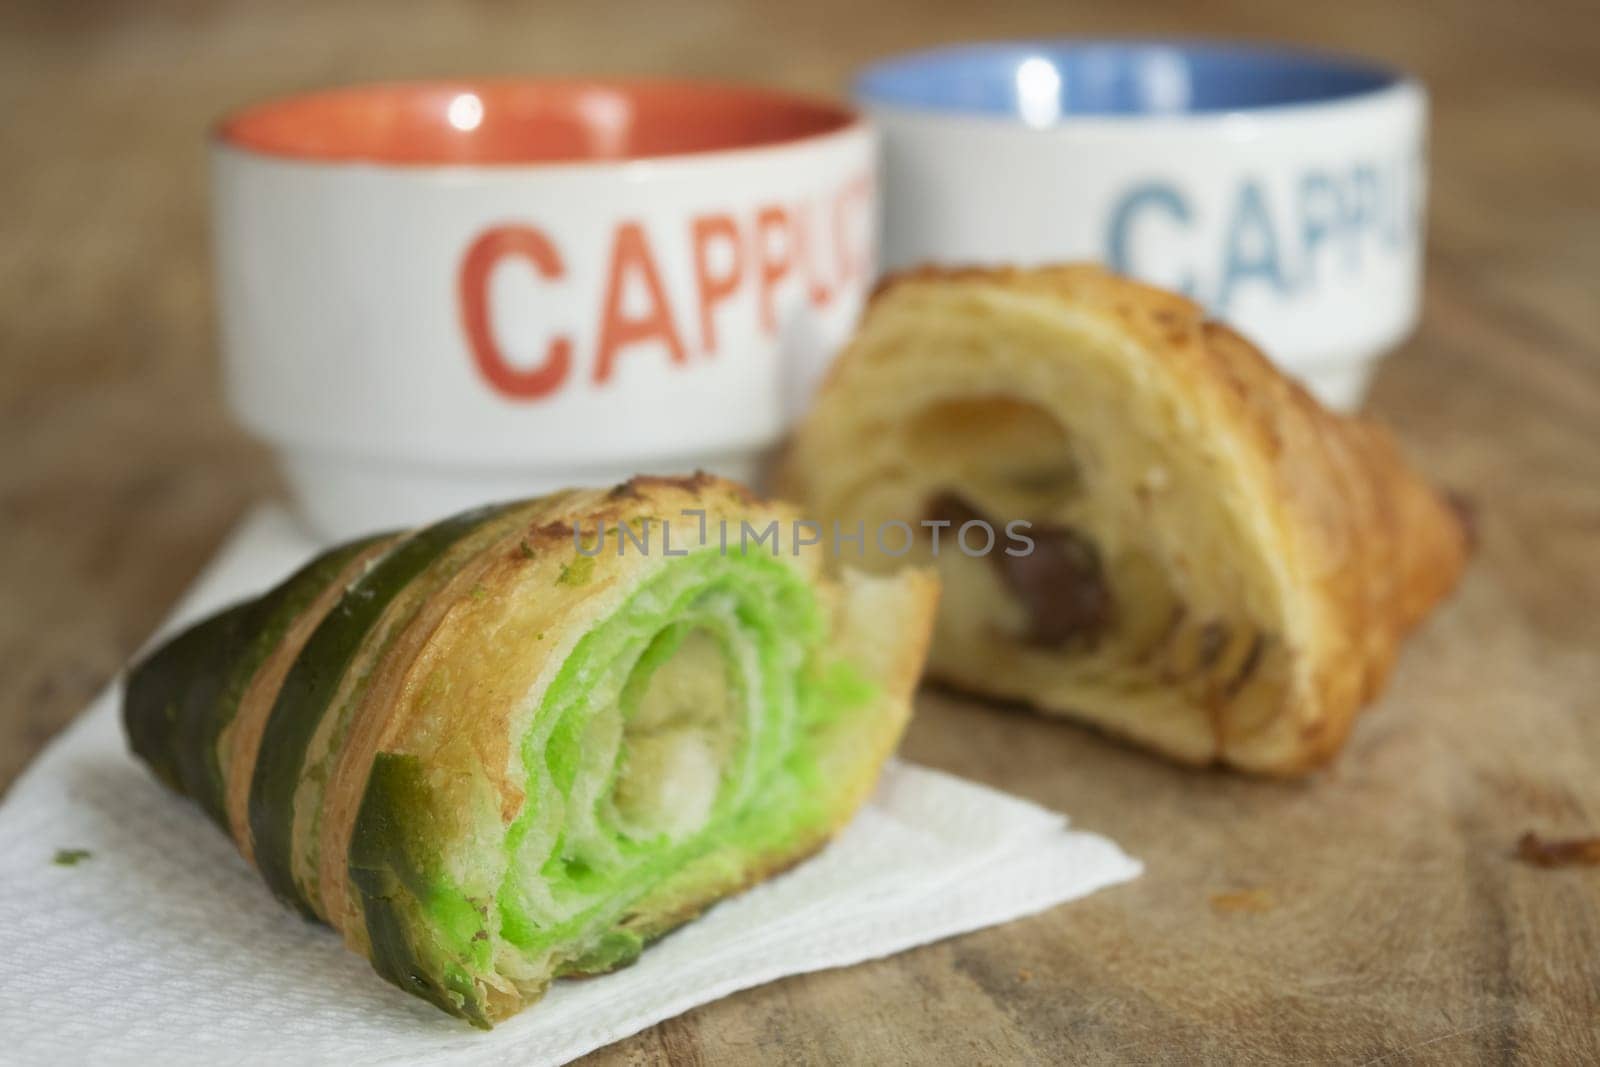 morning awakening with cappuccino and half pistachio croissant